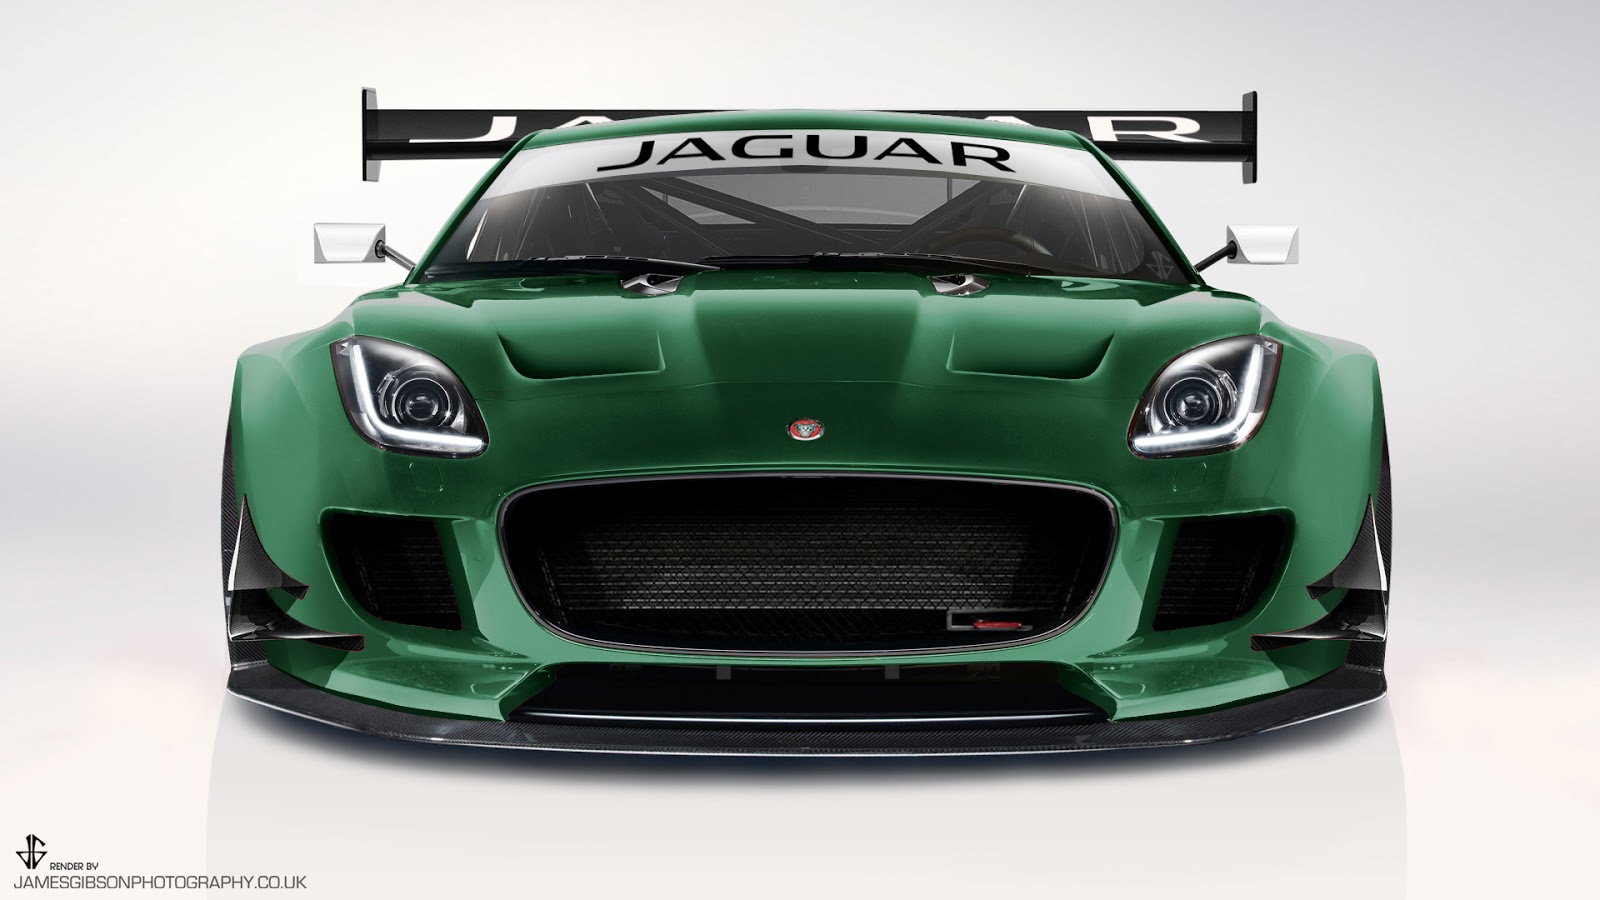 The Invictus Games Racing GT4 Jaguar F Type out on track for British GT  Press Day 